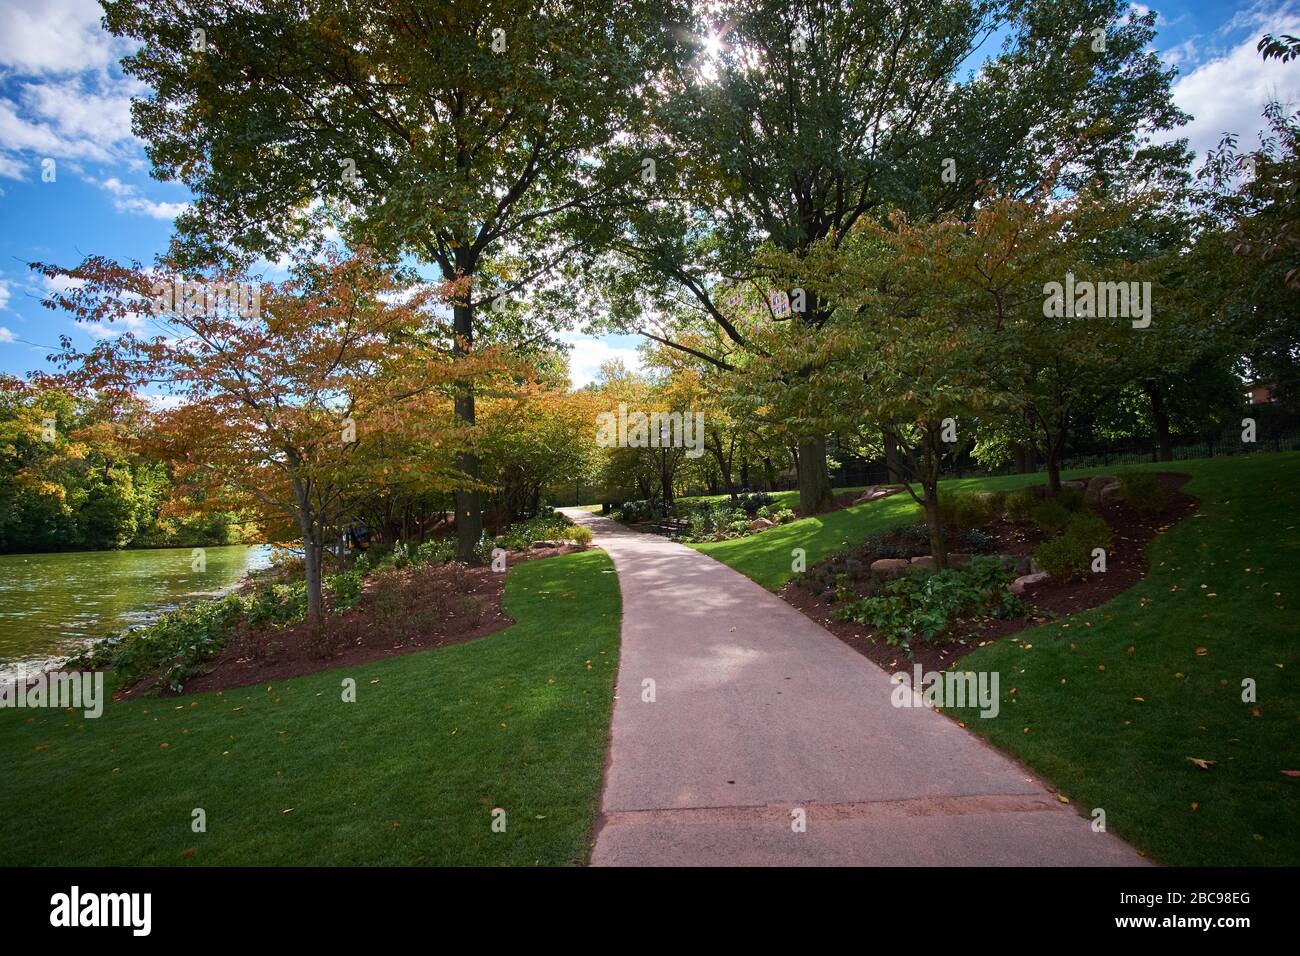 Newark, New Jersey, USA - 10/24/2018: Branch Brook Park on a sunny day showing concrete walking path. Stock Photo